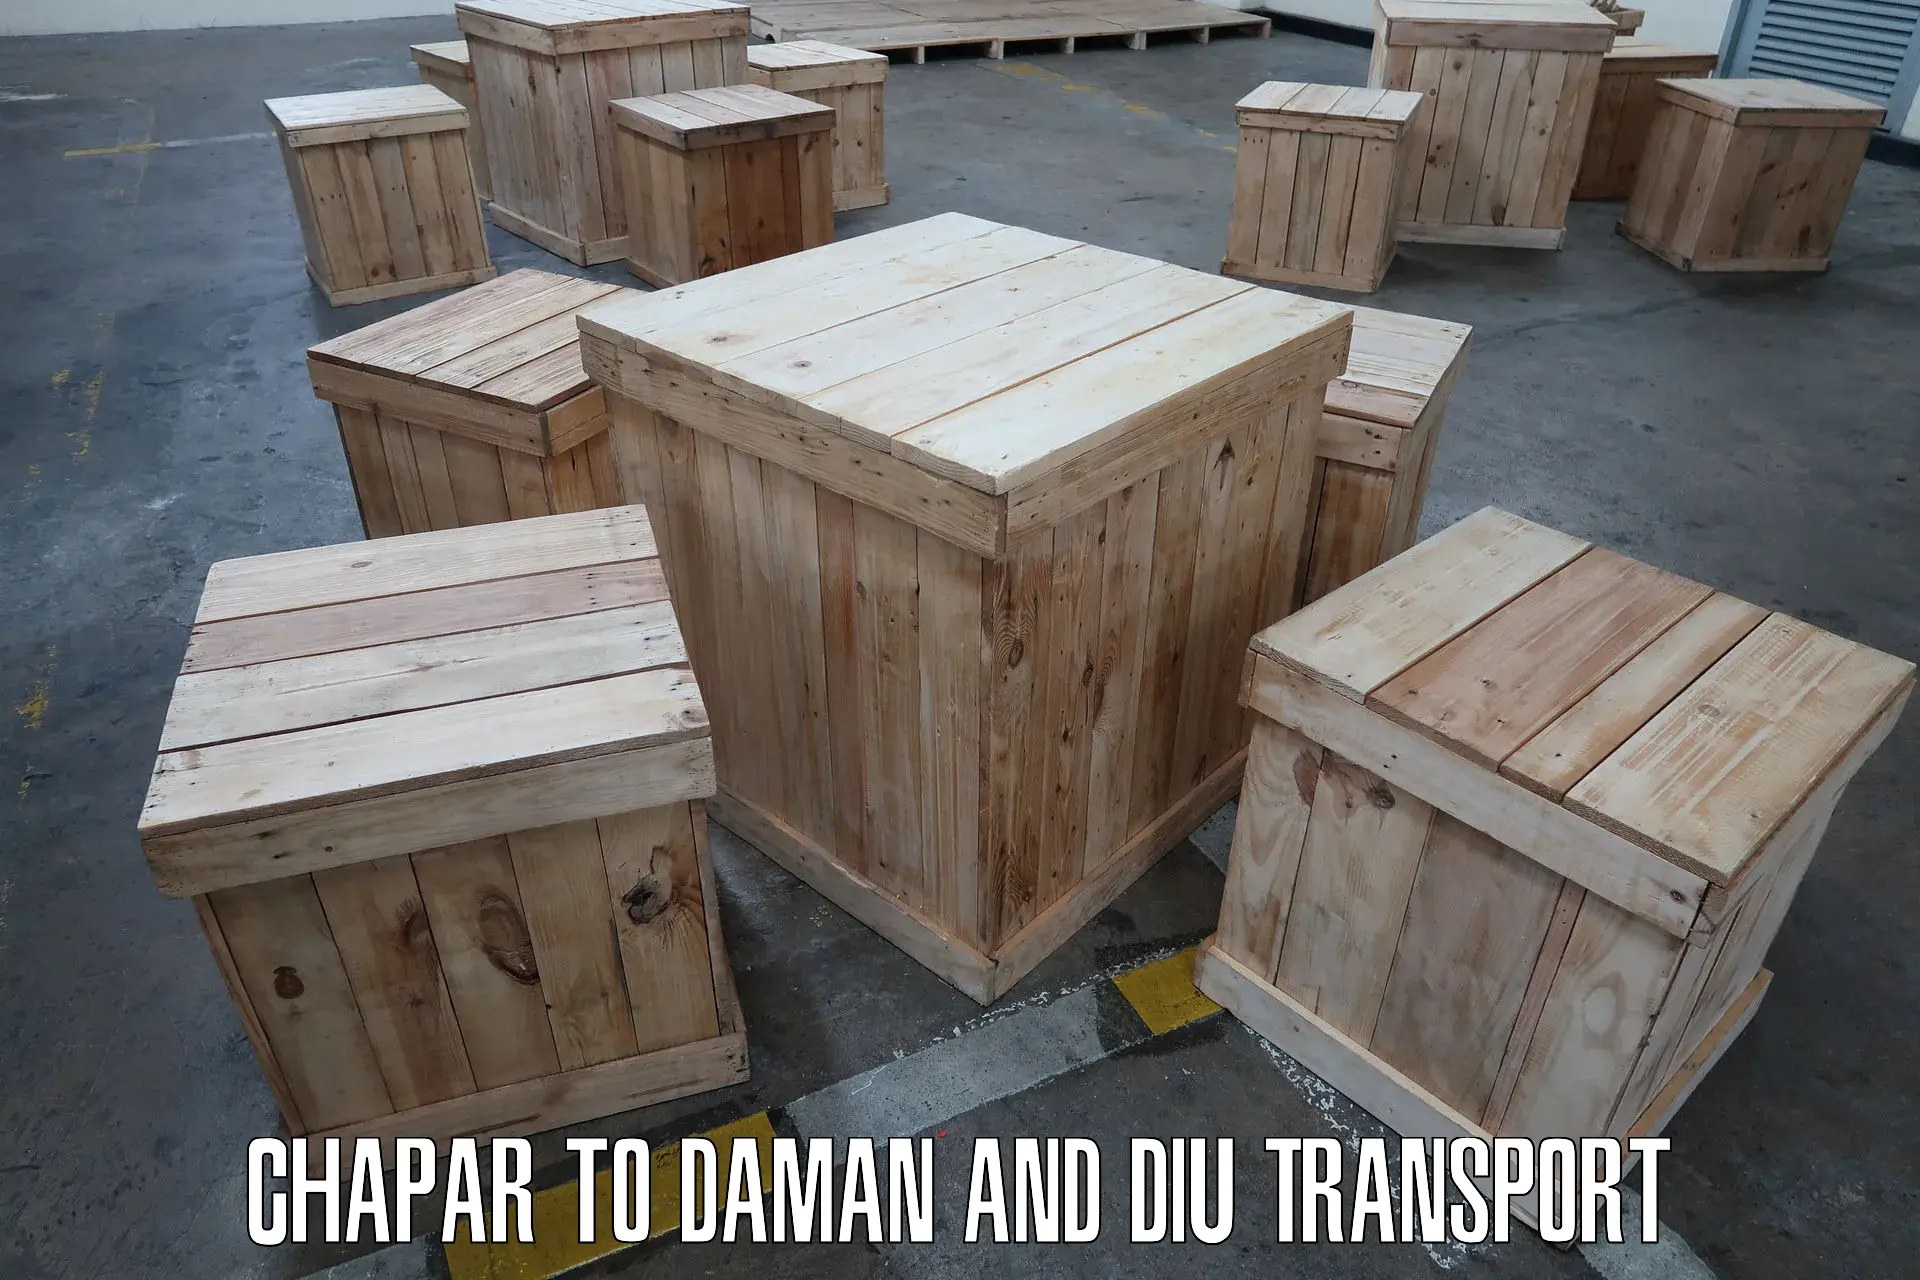 Transport shared services Chapar to Daman and Diu